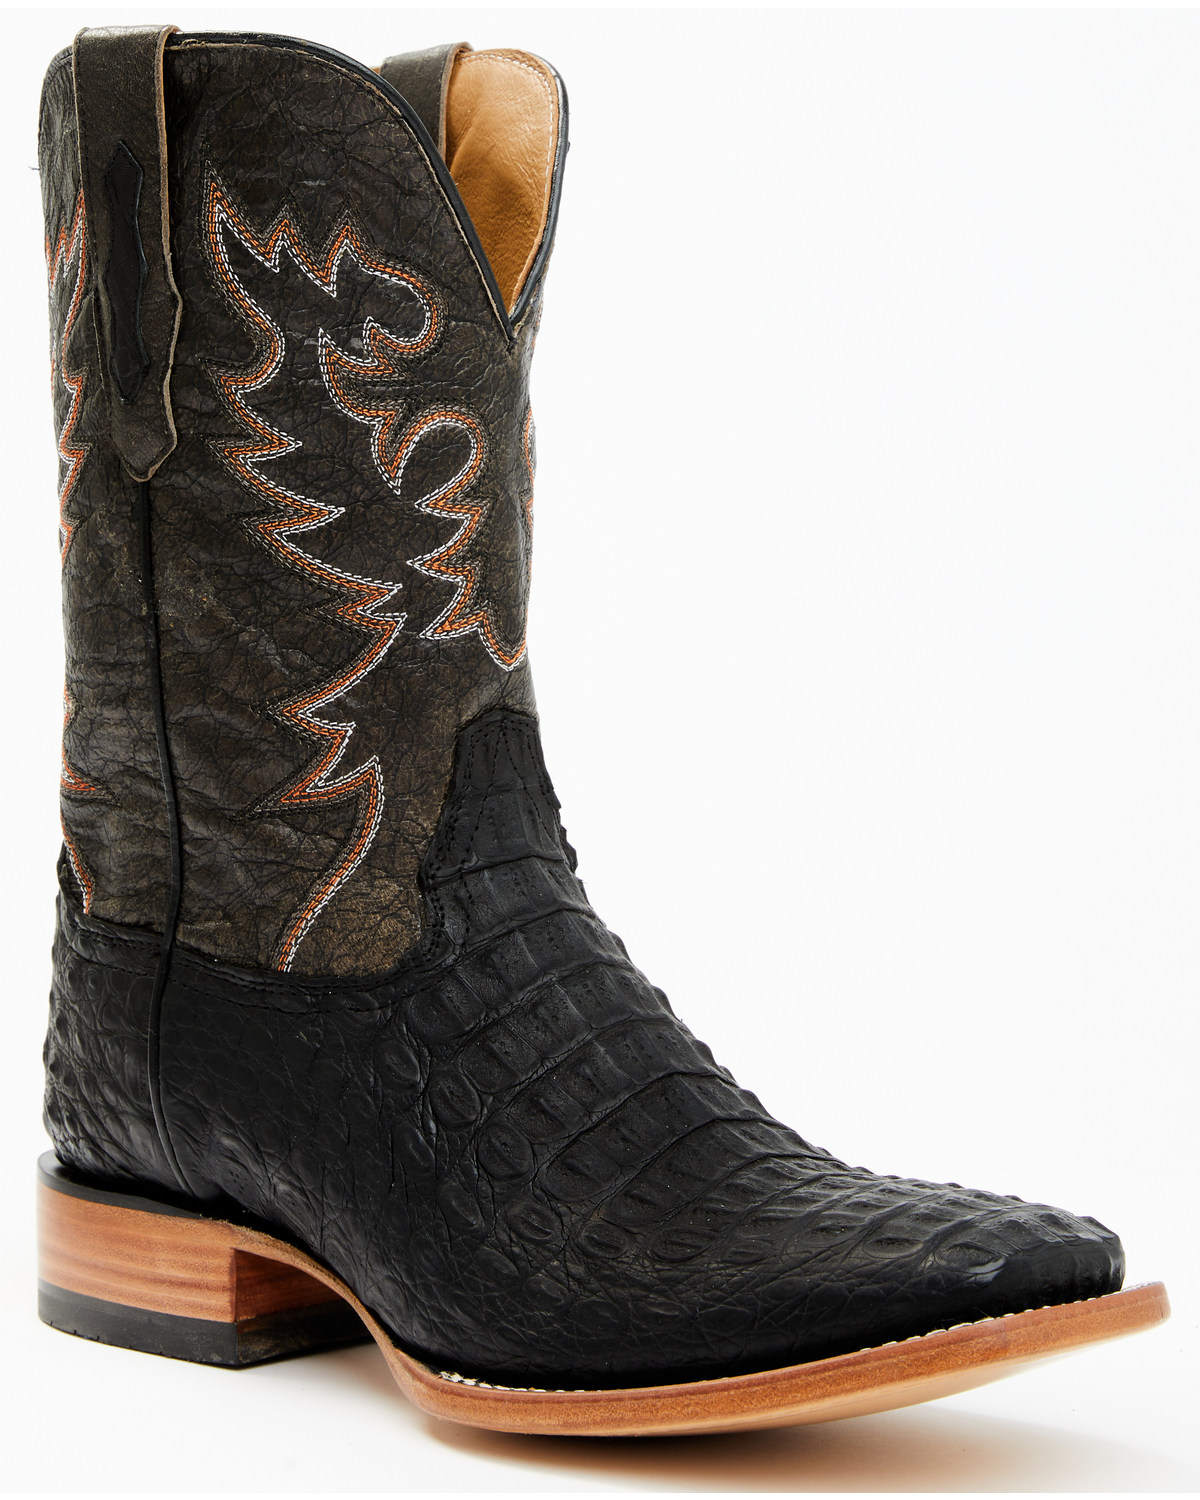 Cody James Men's Exotic Caiman Belly Western Boots